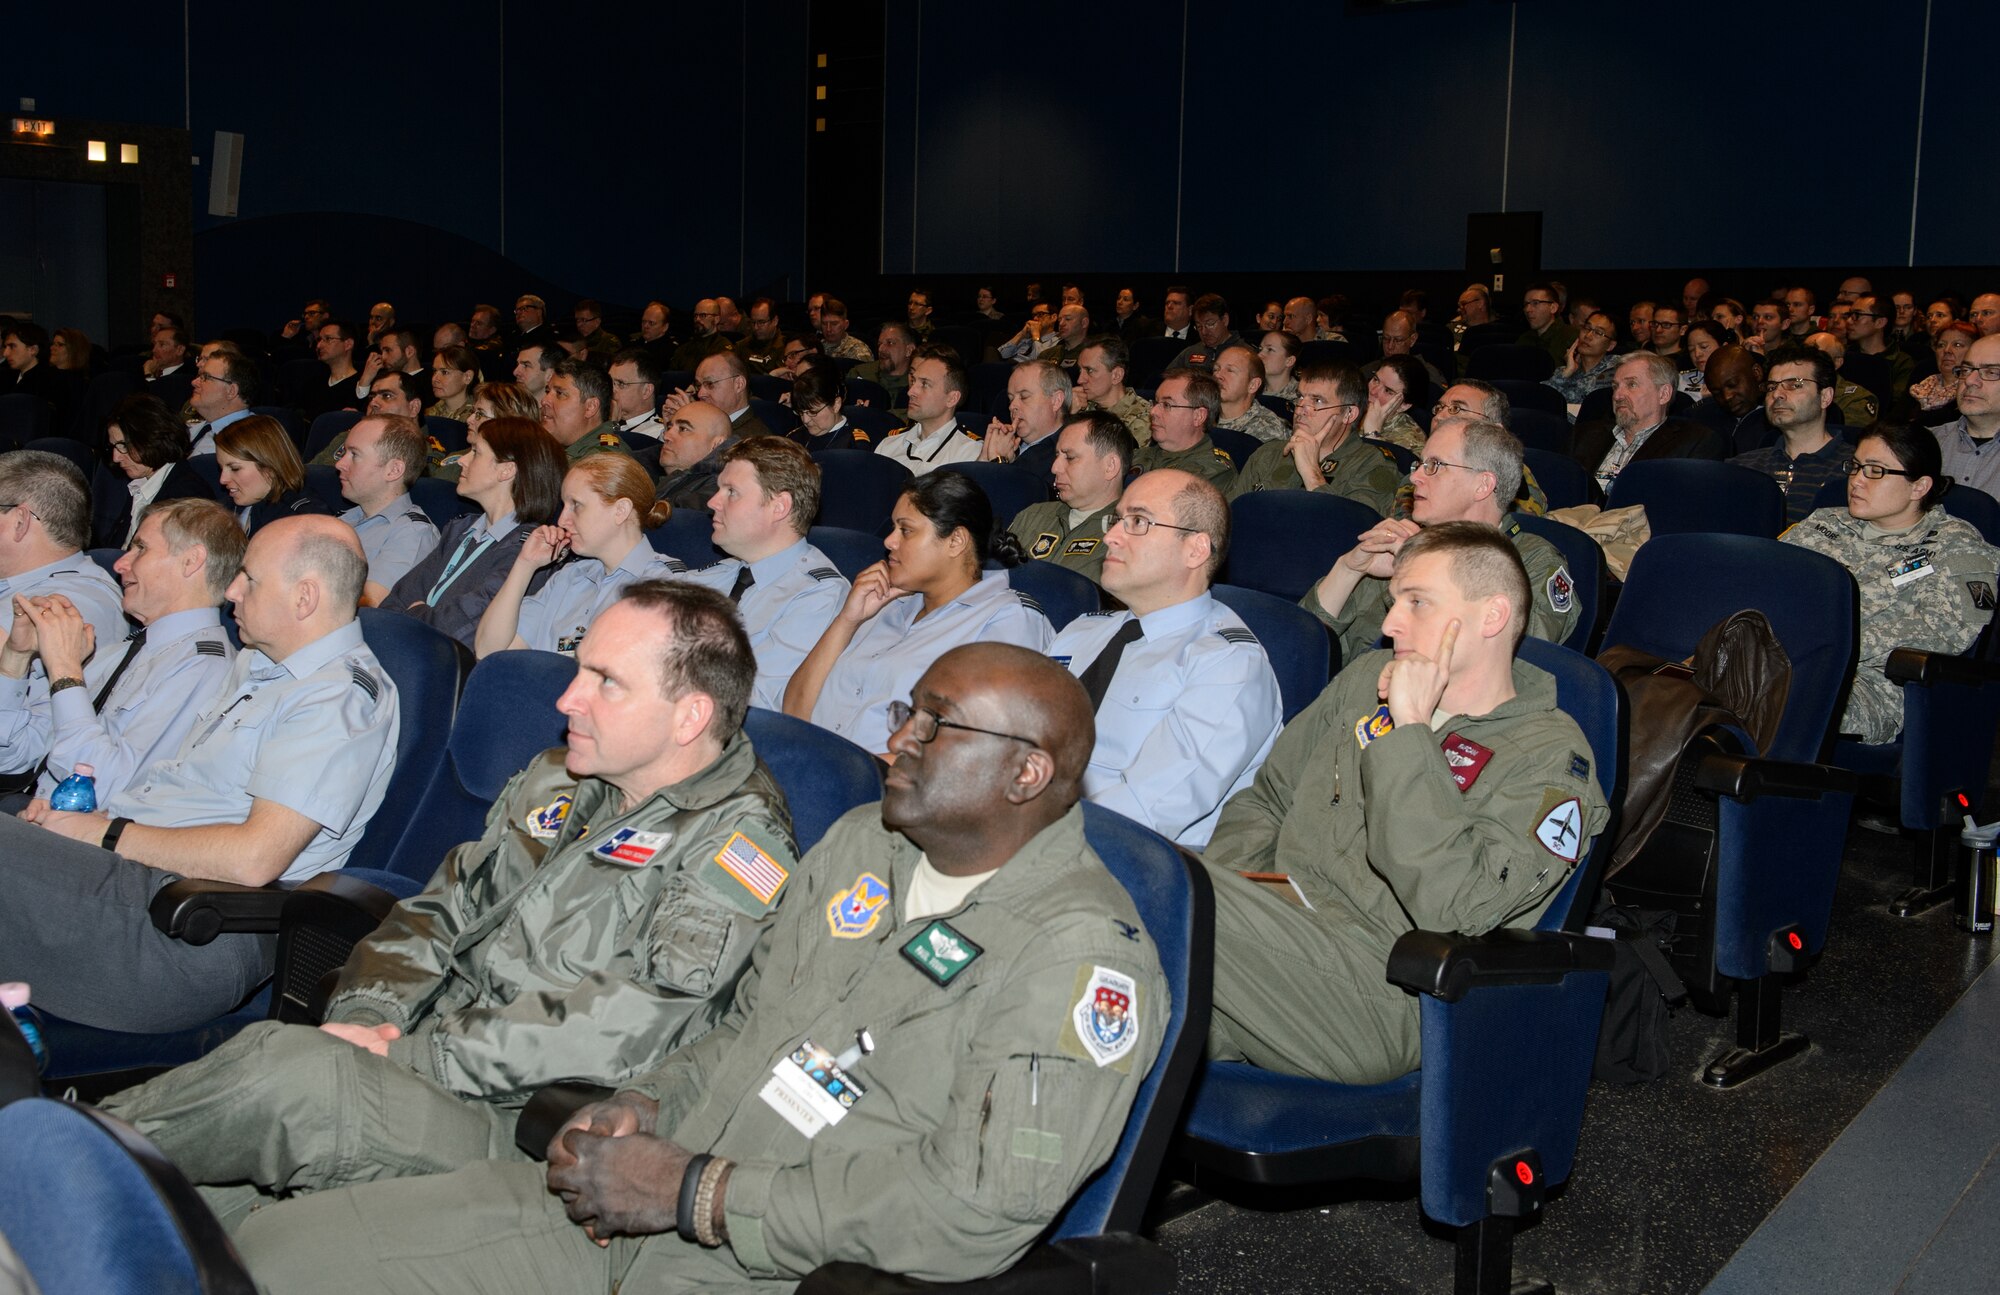 Medical professionals listen to a speaker at Ramstein Air Base, Germany, March 9, 2015. More than 200 gathered for the Ramstein Aerospace Medicine Summit and NATO Science and Technology Organization Technical Course to share knowledge and develop partnerships. (U.S. Air Force photo/Staff Sgt. Armando A. Schwier-Morales)